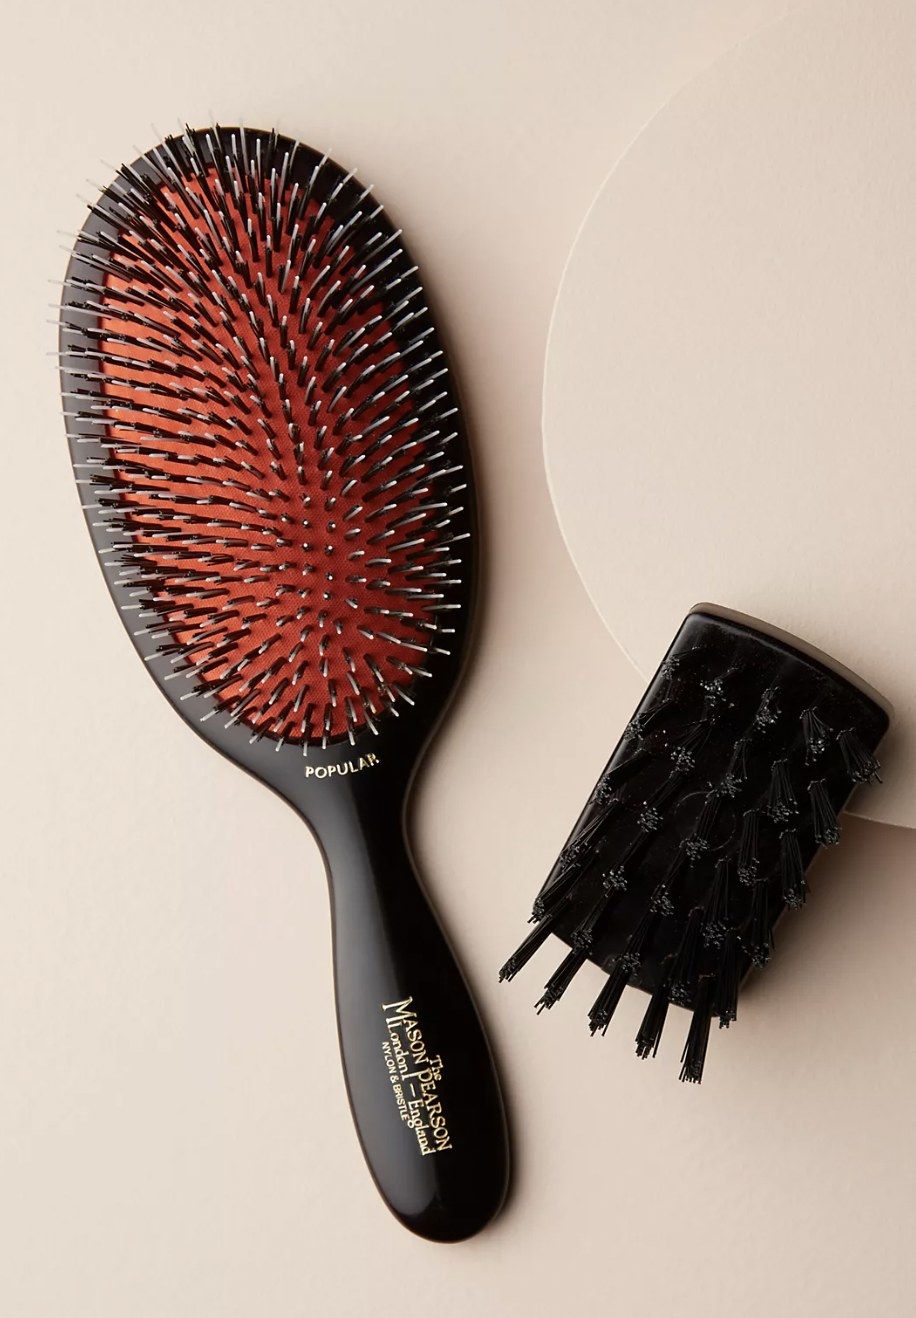 the brush next to its cleaning brush